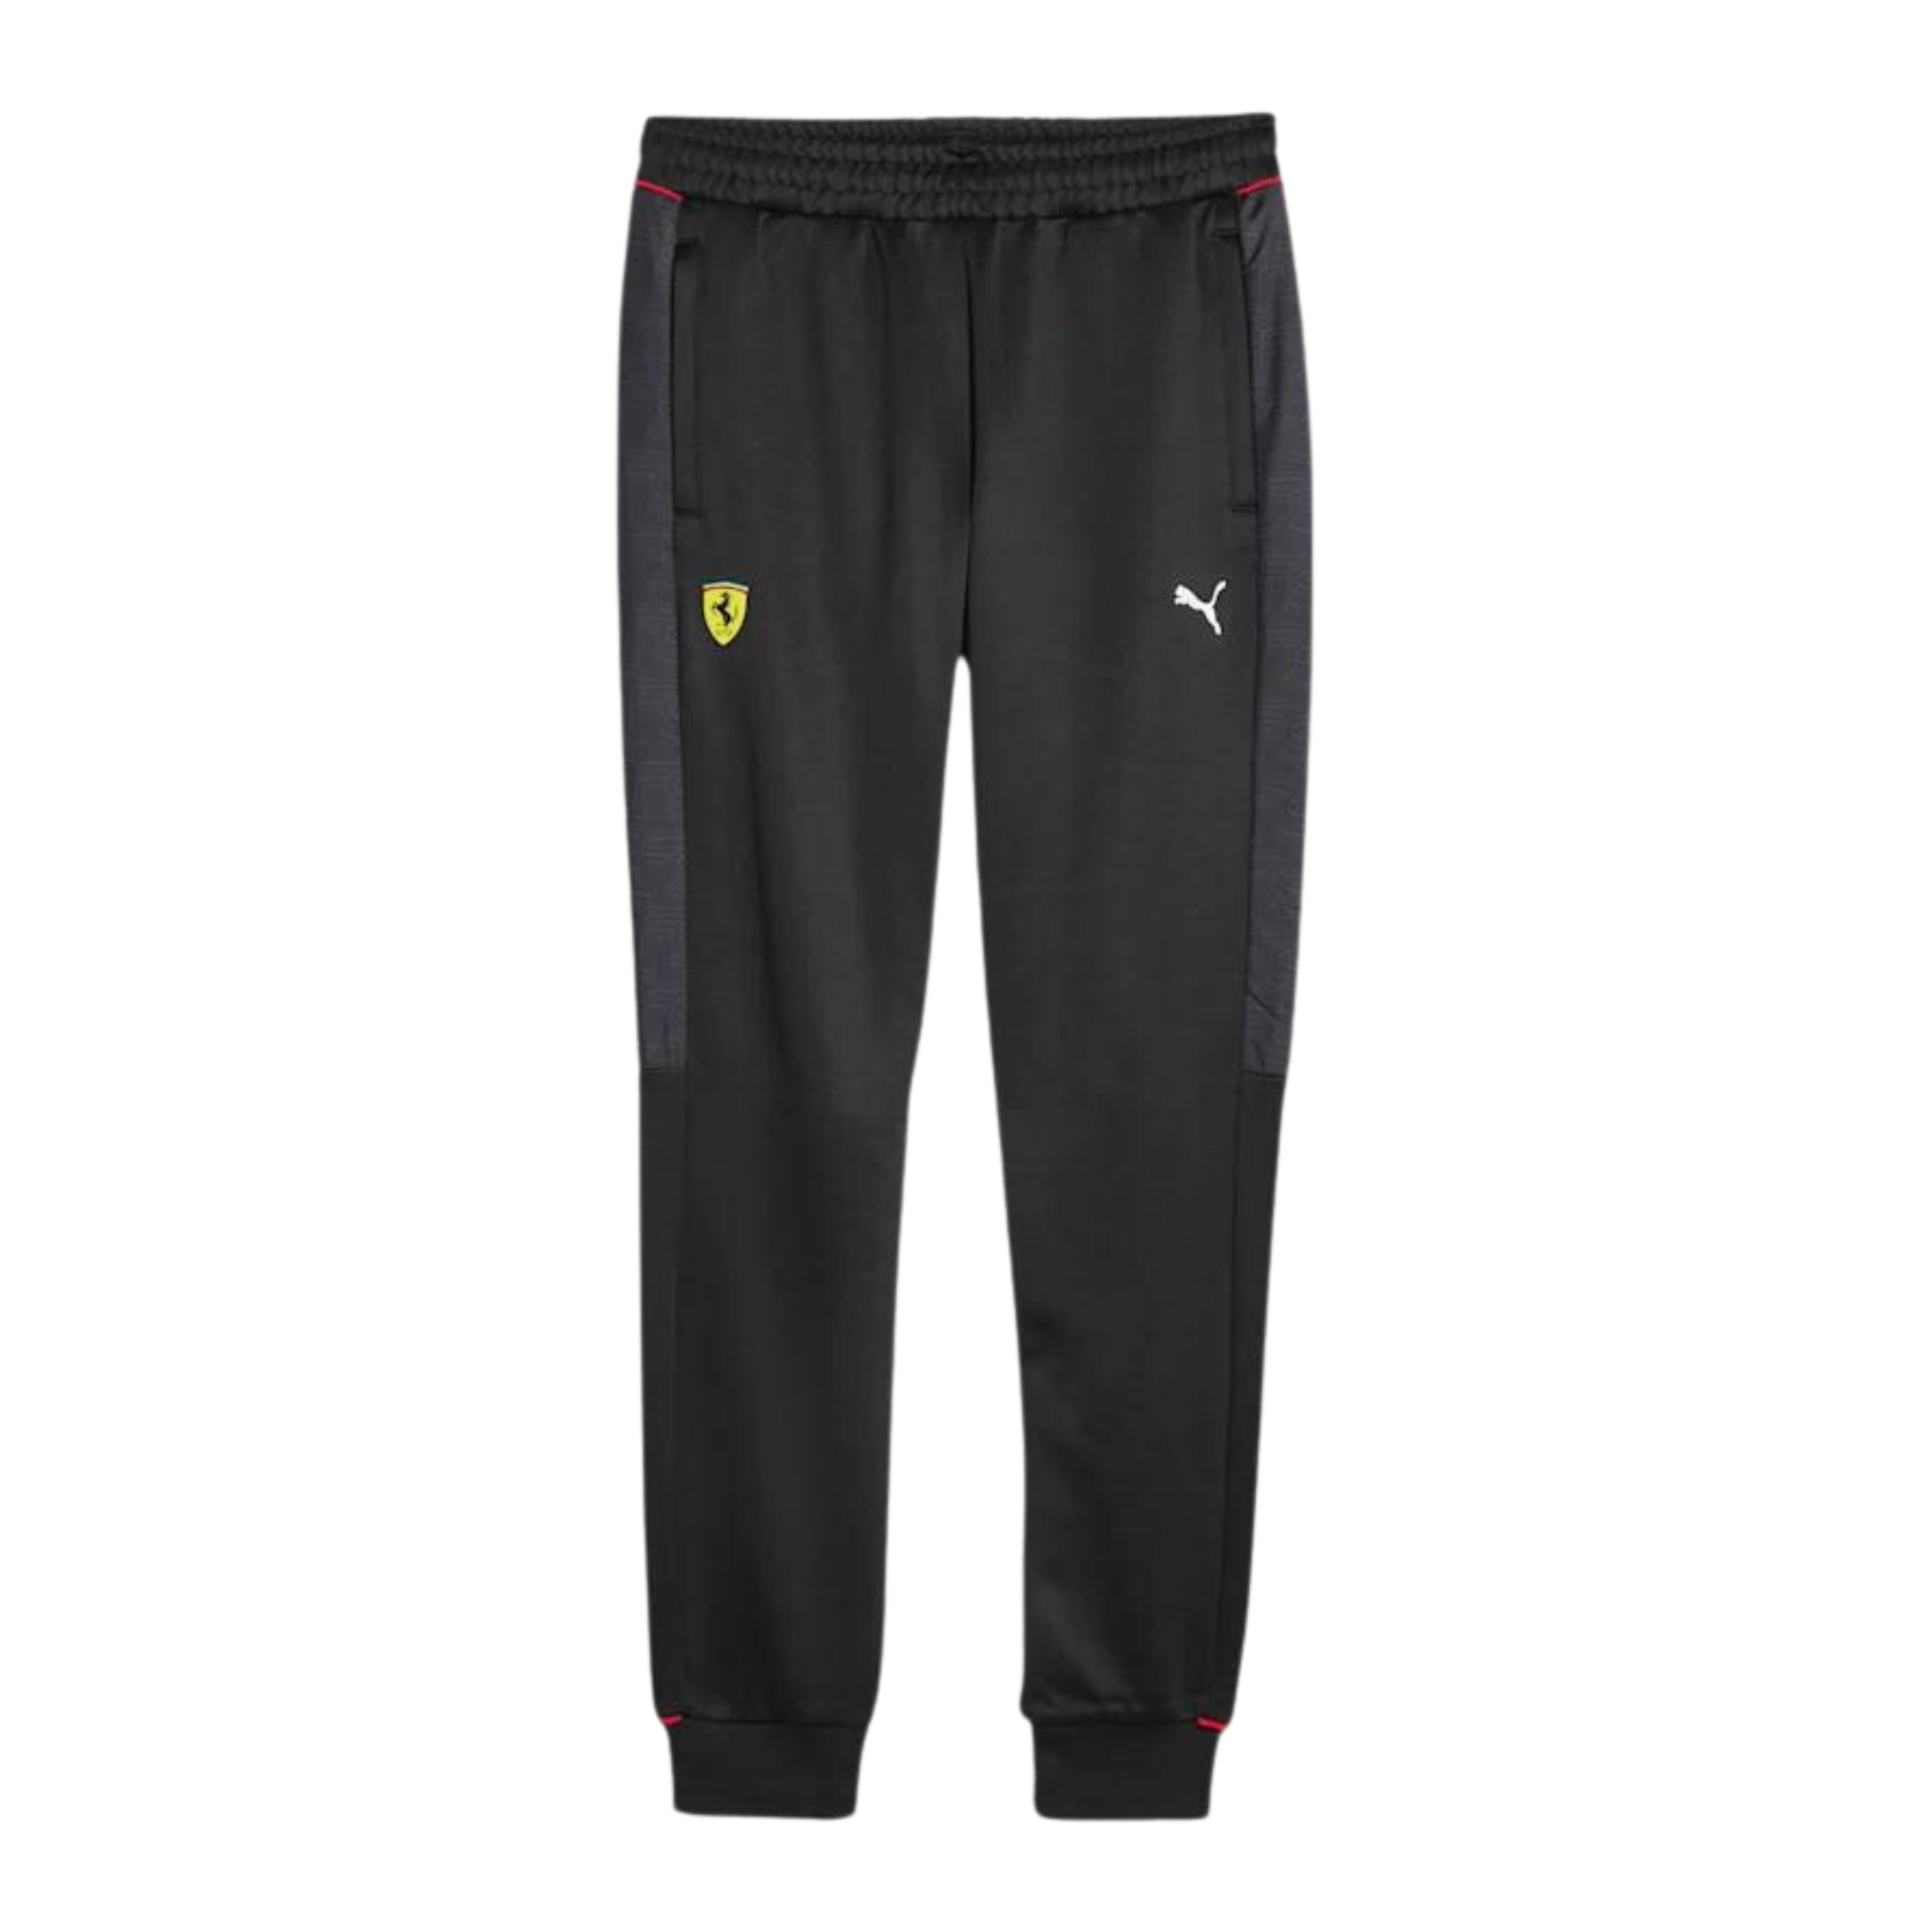 Ferrari men's sports leggings with reflective elements training trousers  with logo patch 270055033 BLK Black